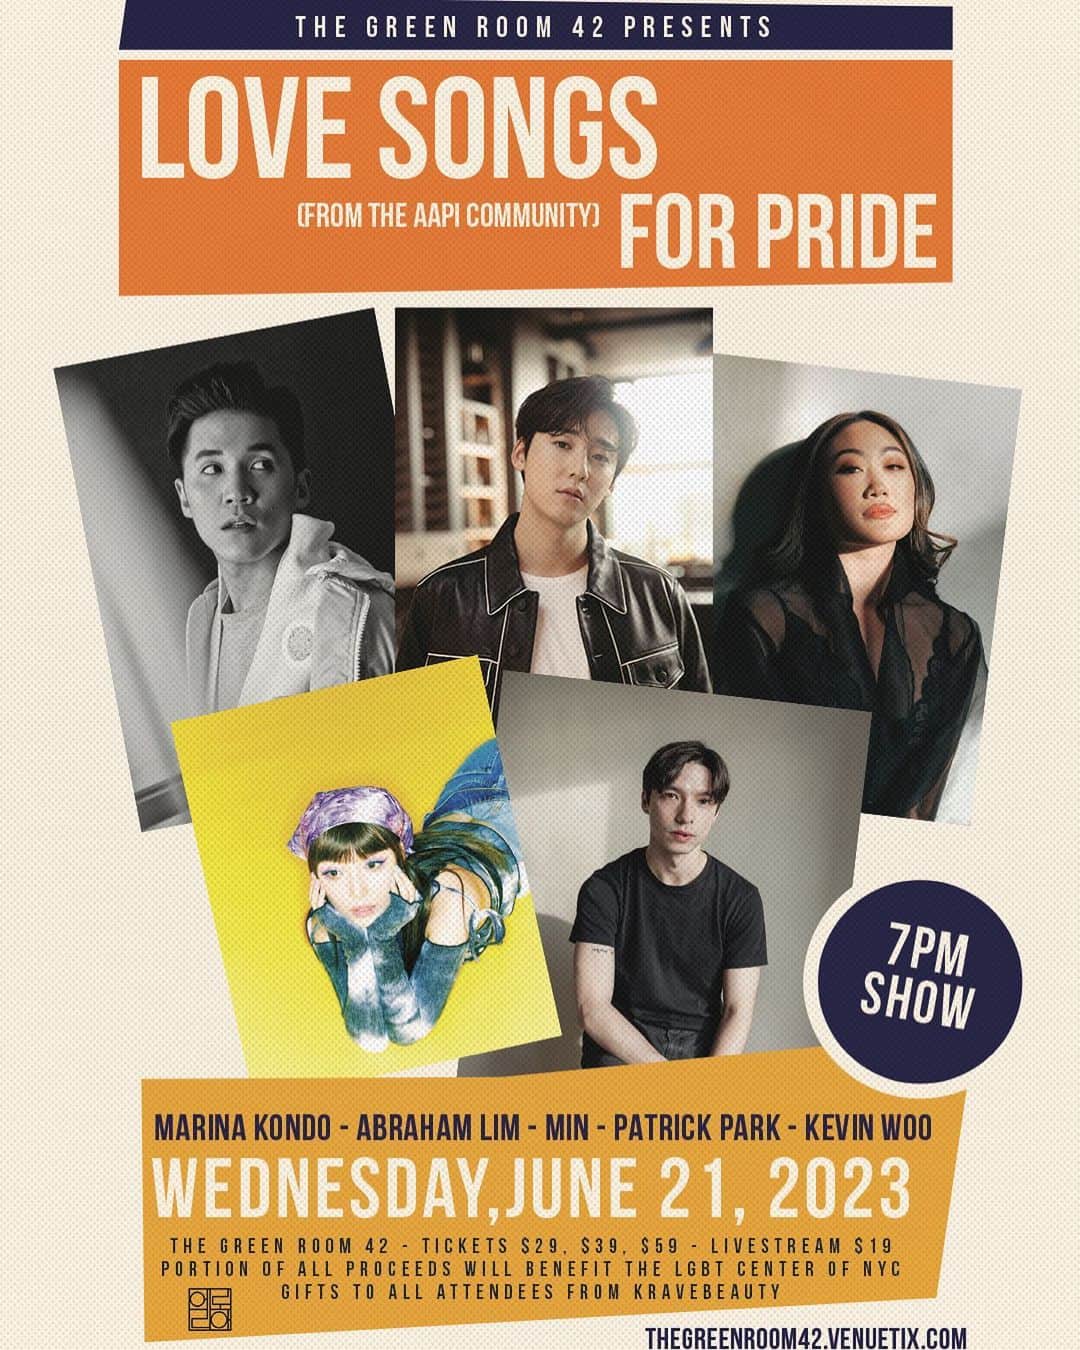 ケビン のインスタグラム：「HAPPY PRIDE MONTH🏳️‍🌈🏳️‍⚧️ Truly happy to announce that I’ll be performing on stage alongside a few of my @kpopbroadway cast-mates for LOVE SONGS FOR PRIDE💜 at @thegreenroom42 in NYC on June 21st. Make sure to mark you calendars!  We’re so happy to literally use our voices to uplift and celebrate the LGBTQ+ community. Come join us for a night of joyous celebration filled with love tunes and dancing!💃🕺  Tickets available NOW (link in BIO) Livestream tix are also available for those who can’t make it in person!🙌🏻  Portion of all proceeds will benefit the LGBT Center of NYC @lgbtcenternyc   Special shout out to @therealabraham for producing this show🫶🏻, @kravebeauty for providing gifts for all attendees, and @elorea for being our wonderful sponsor!  CAN’T WAIT TO SEE YOU ALL THERE!🙌🏻  クローバーのみなさん！6月21日にLOVE SONGS FOR PRIDEという公演に参加します！KPOPのキャストと久しぶりに立つステージですごく嬉しいです！今月はPRIDE MONTHでLGBTQ+コミュニティをサポートするステージです🌈 生配信しますので日本からもたくさんの応援よろしくお願いします！チケットはプロフィールで💜  클로버 여러분! 6월 21일에 LOVE SONGS FOR PRIDE라는 공연에 참가합니다!  KPOP뮤지컬의 캐스트와 오랜만에 서는 스테이지라서 너무 기쁩니다! 이번 달은 전셰게의 PRIDE MONTH이라서 LGBTQ+ 커뮤니티를 서포트하는 공연입니다🌈  실제로 못 오신 분들을 위해 생중계 준비 되어있으니 한국에서도 많은 응원 부탁드립니다! 티켓 링크는 프로필에💜」